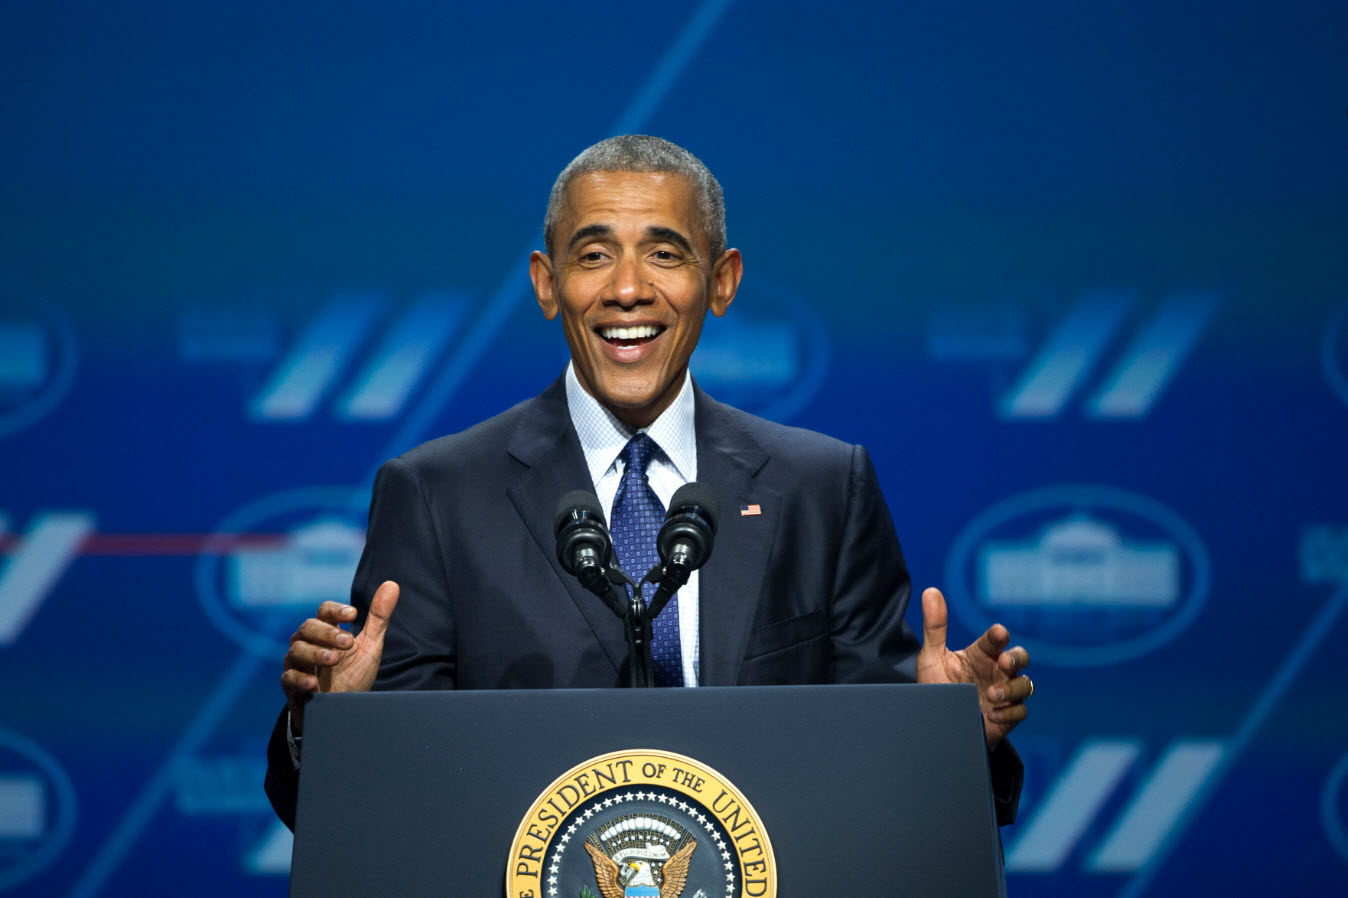 President Obama at the Women's Summit